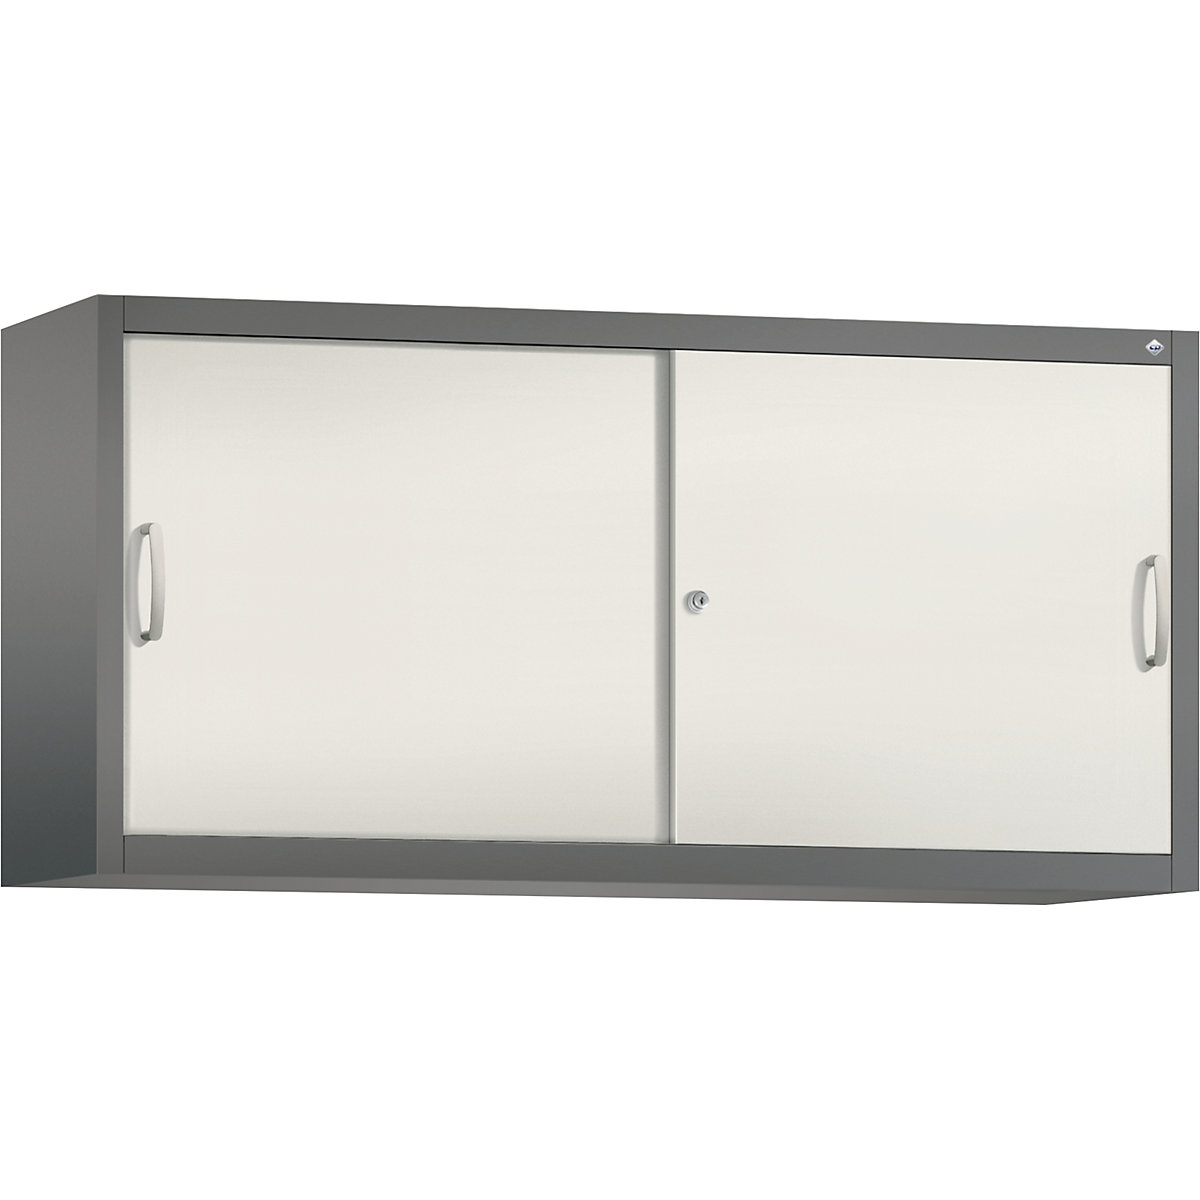 ACURADO add-on cupboard with sliding doors – C+P, 2 shelves, HxWxD 790 x 1600 x 400 mm, volcanic grey / oyster white-16